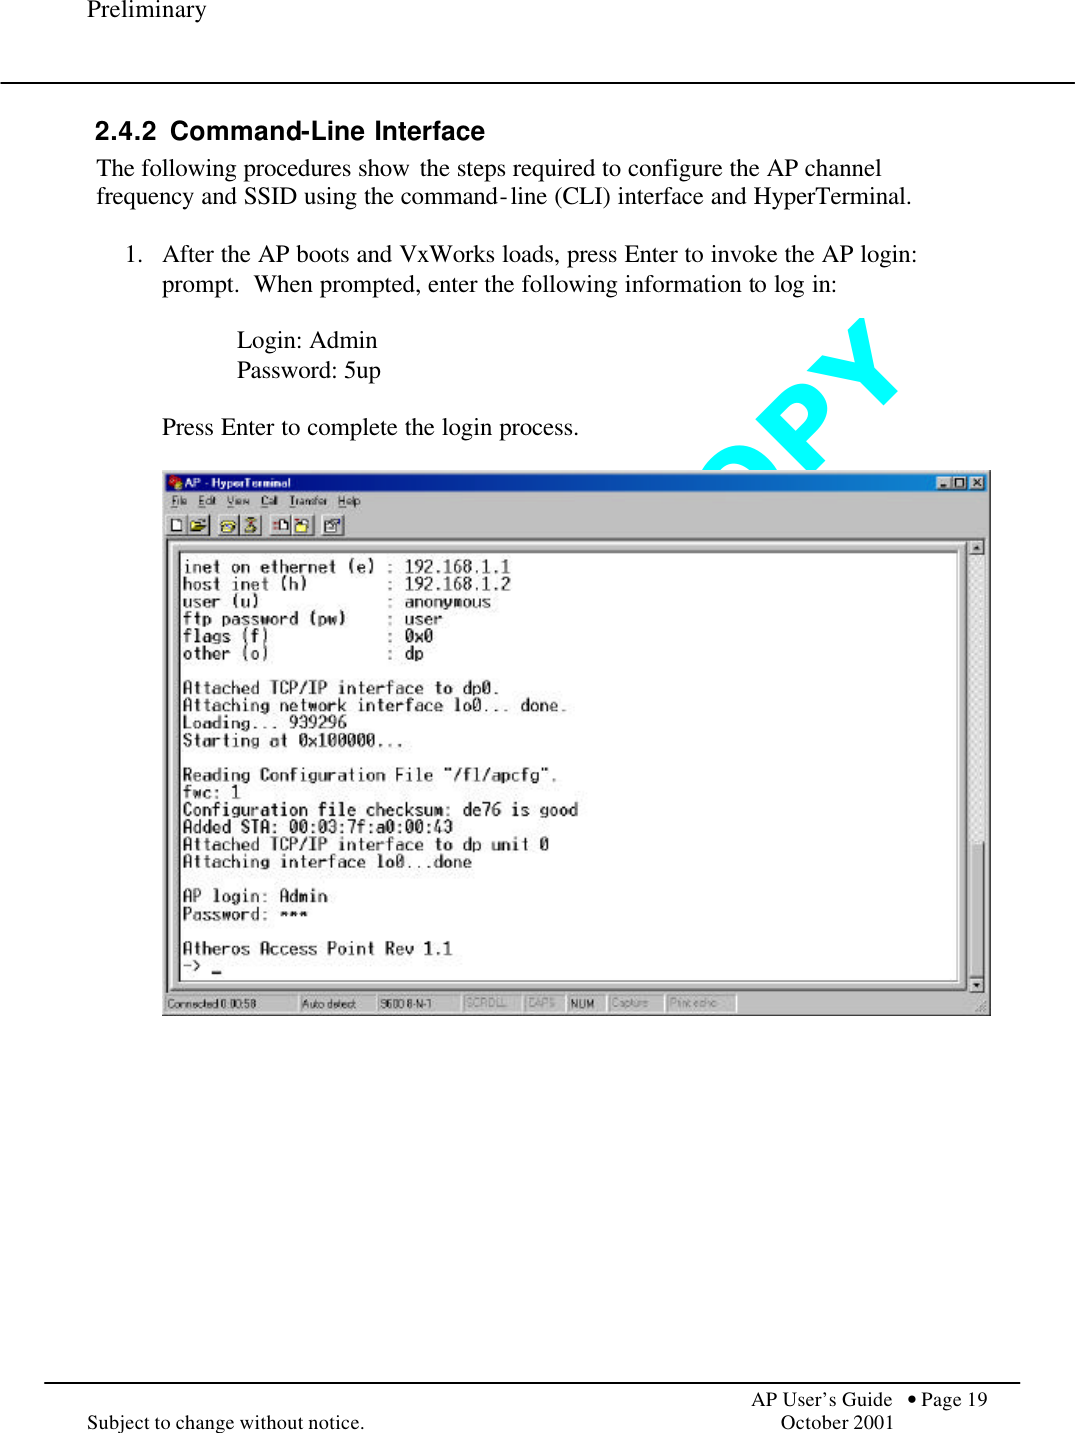 D O   N O T   C O P Y  Preliminary            AP User’s Guide  • Page 19 Subject to change without notice.    October 2001 2.4.2 Command-Line Interface The following procedures show the steps required to configure the AP channel frequency and SSID using the command-line (CLI) interface and HyperTerminal.  1.  After the AP boots and VxWorks loads, press Enter to invoke the AP login: prompt.  When prompted, enter the following information to log in:  Login: Admin Password: 5up  Press Enter to complete the login process.         